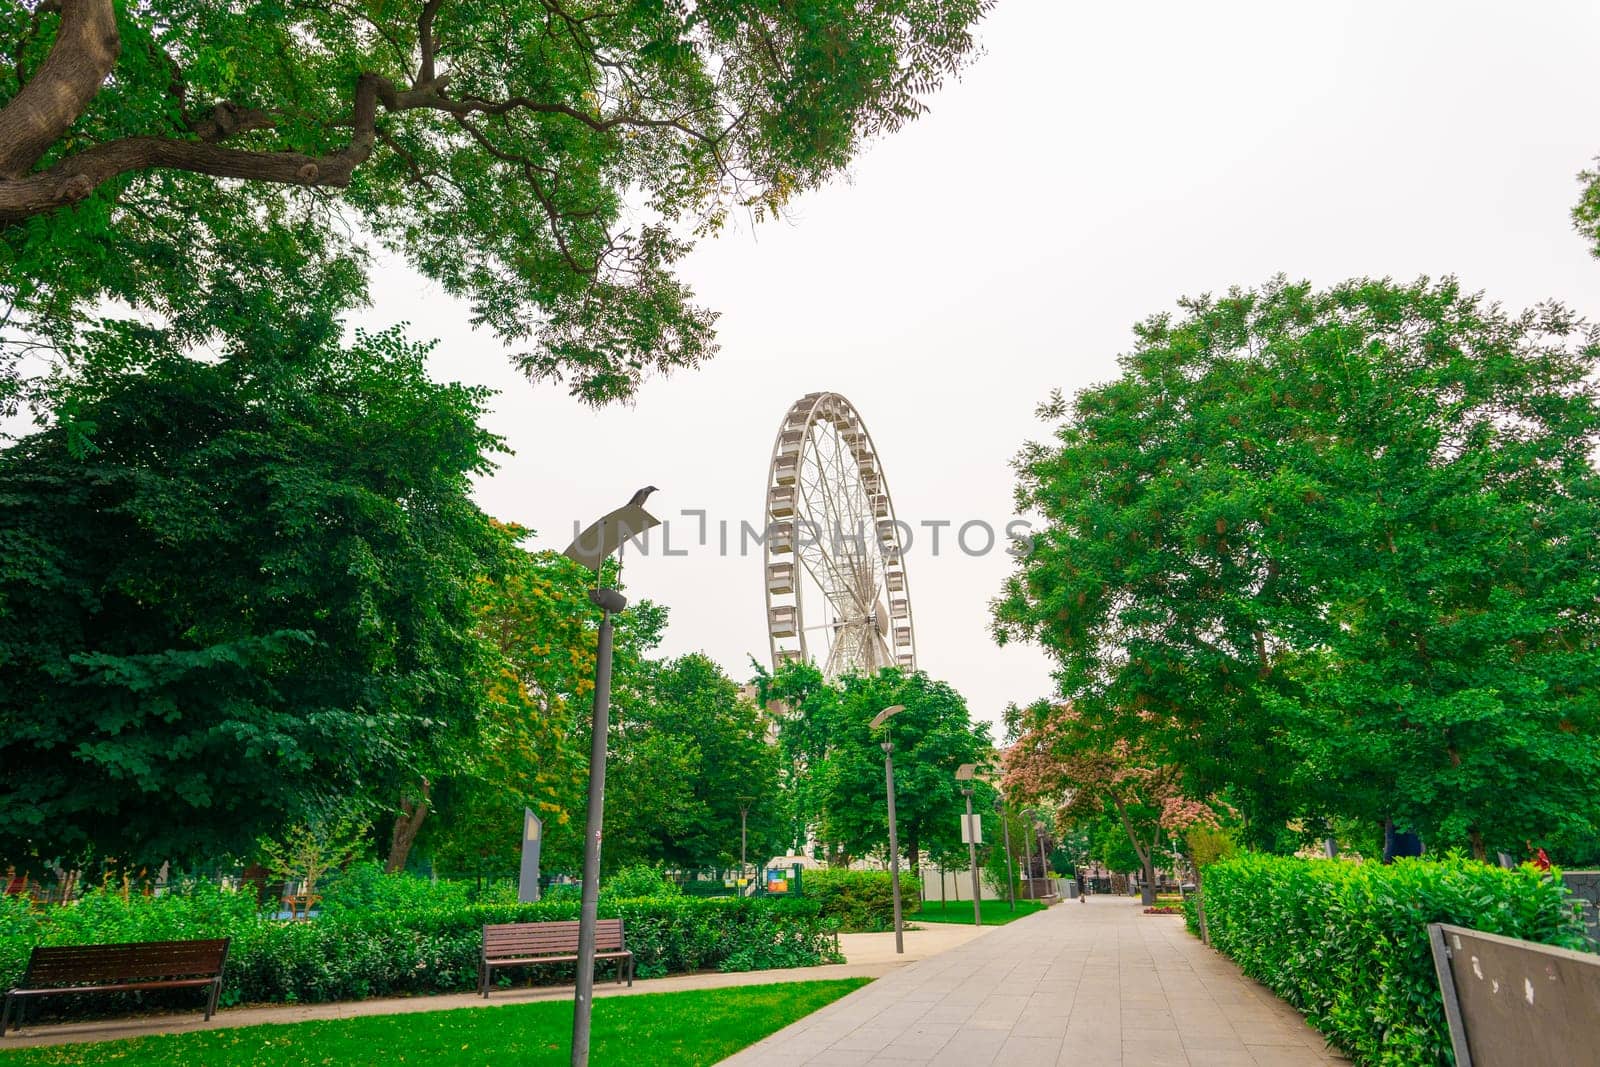 Ferris wheel featuring colourful seating pods against backdrop sky and green flowers in city park by Zelenin